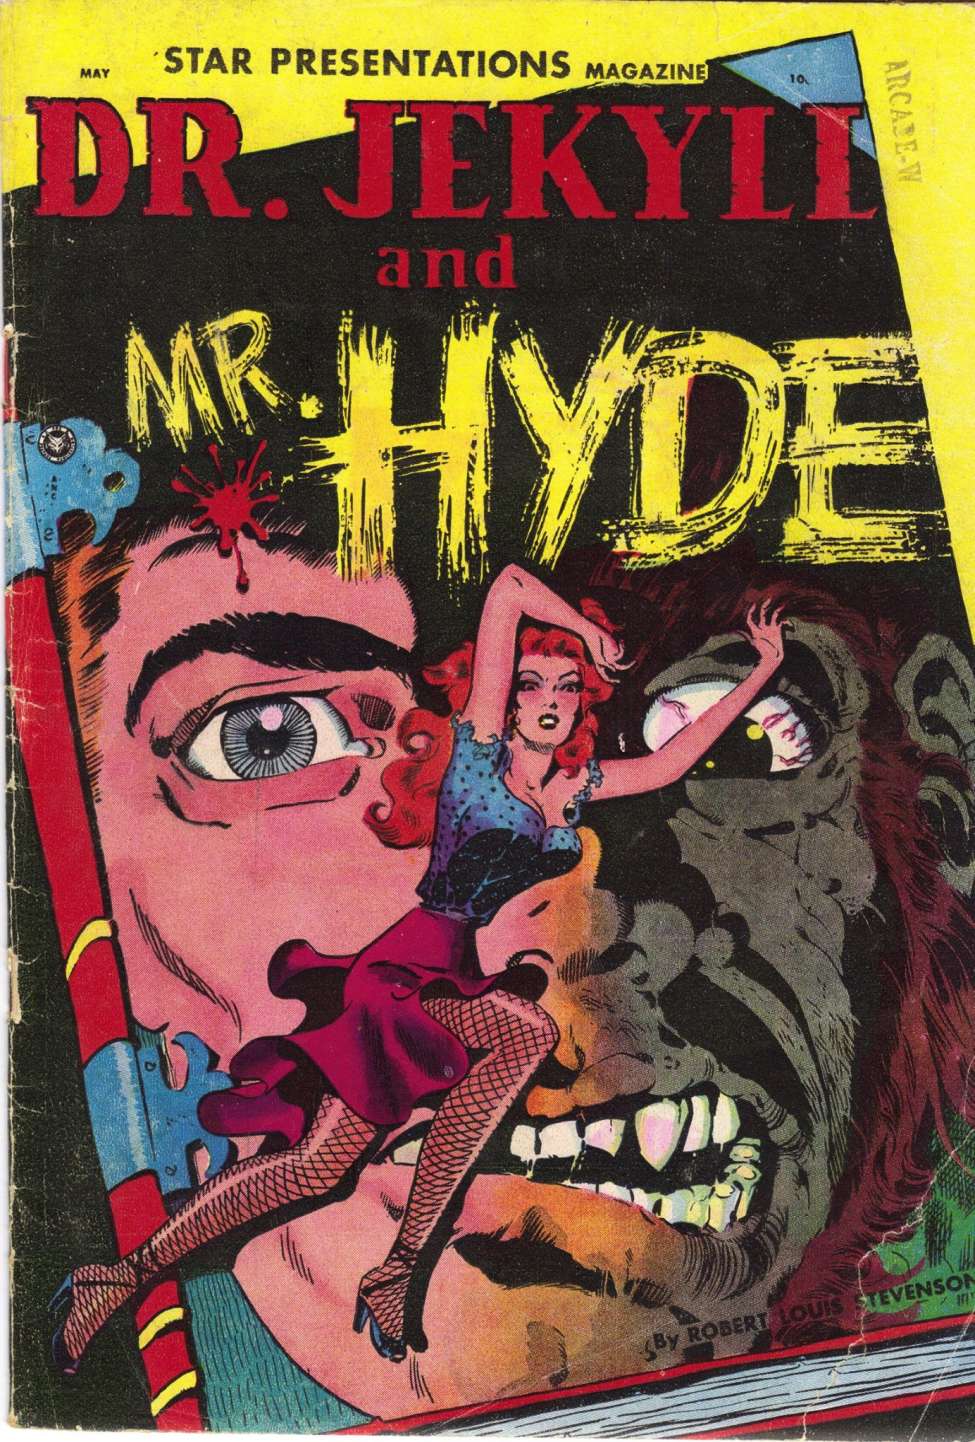 Book Cover For A Star Presentation Magazine 3 - Dr. Jekyll & Mr. Hyde